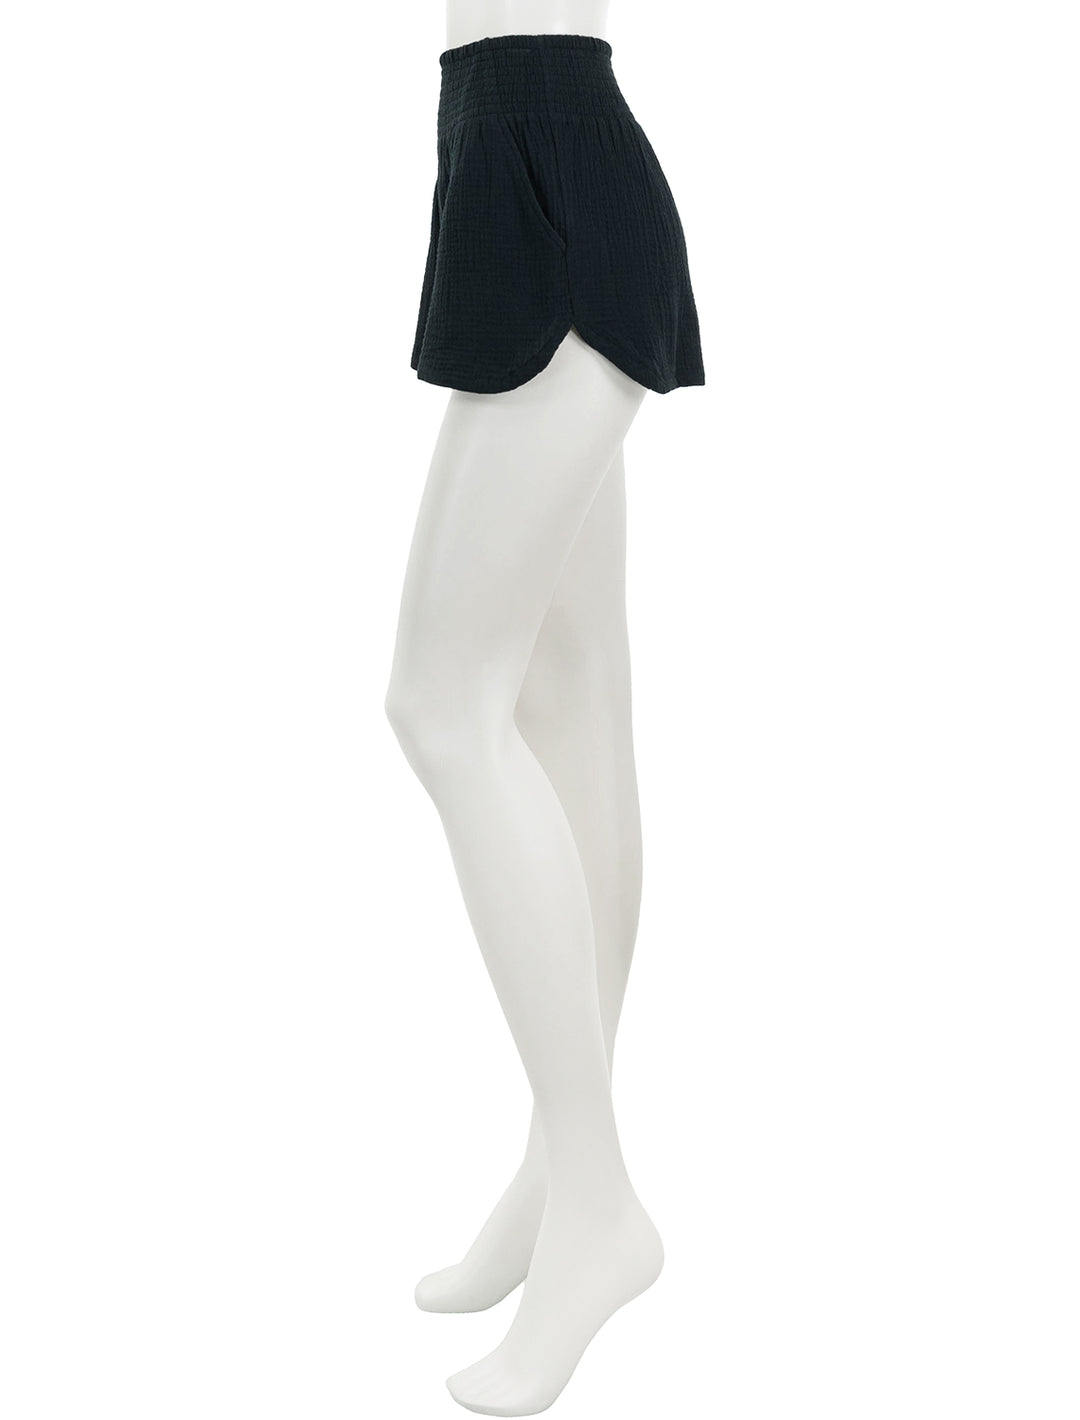 Side view of Marine Layer's corine shorts in black.